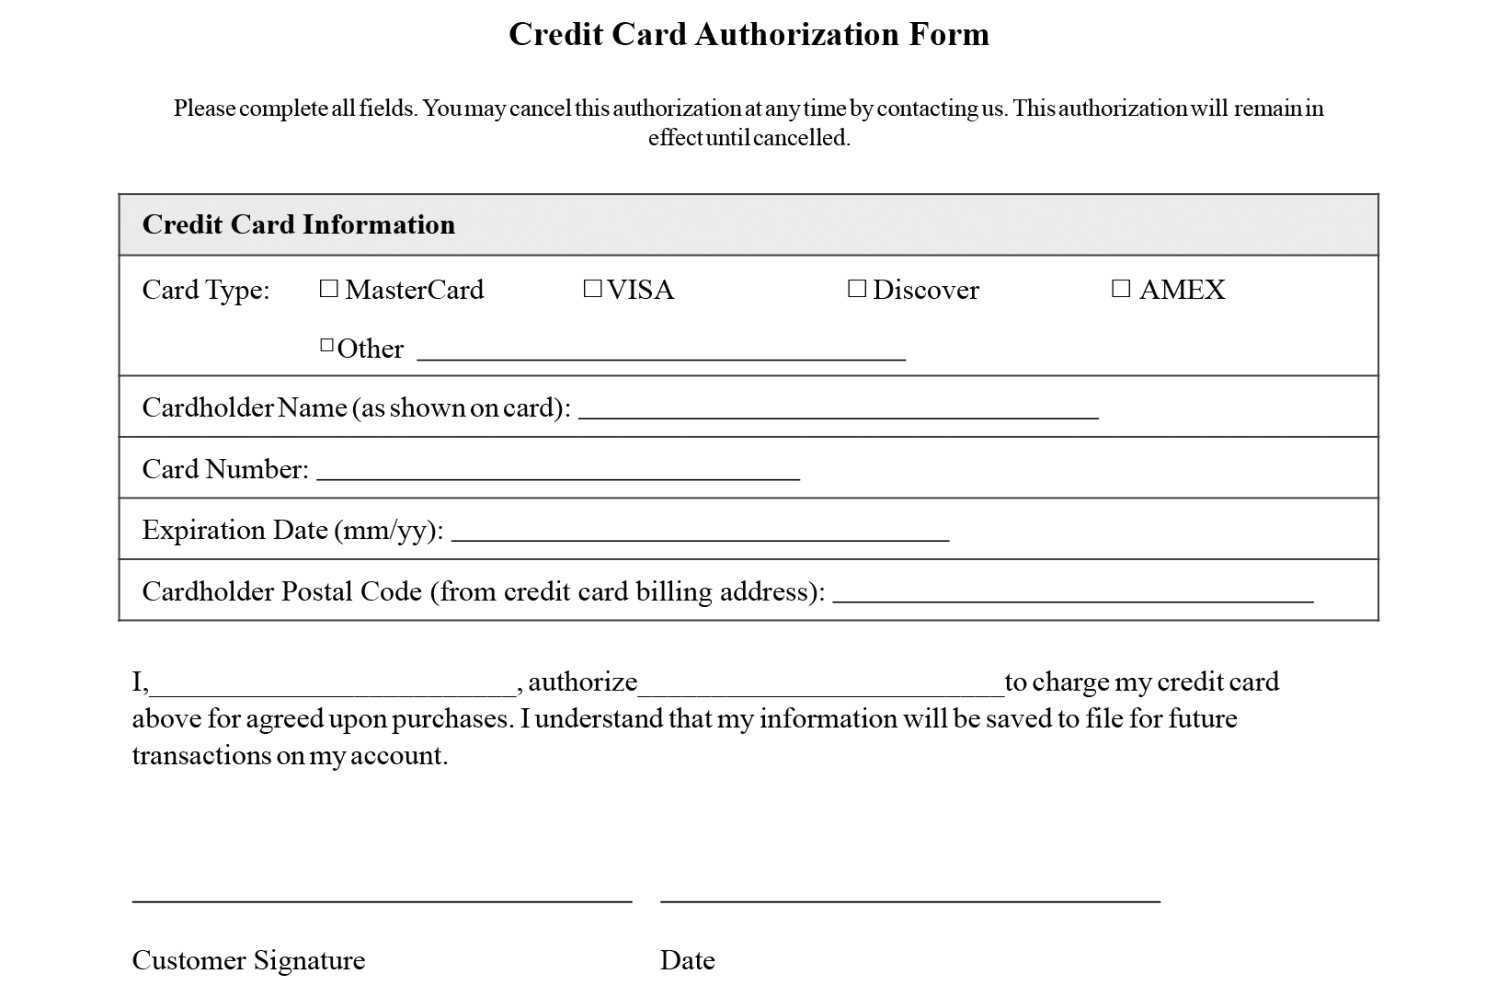 Credit Card Authorization Form Template | Letterncard Within Hotel Credit Card Authorization Form Template